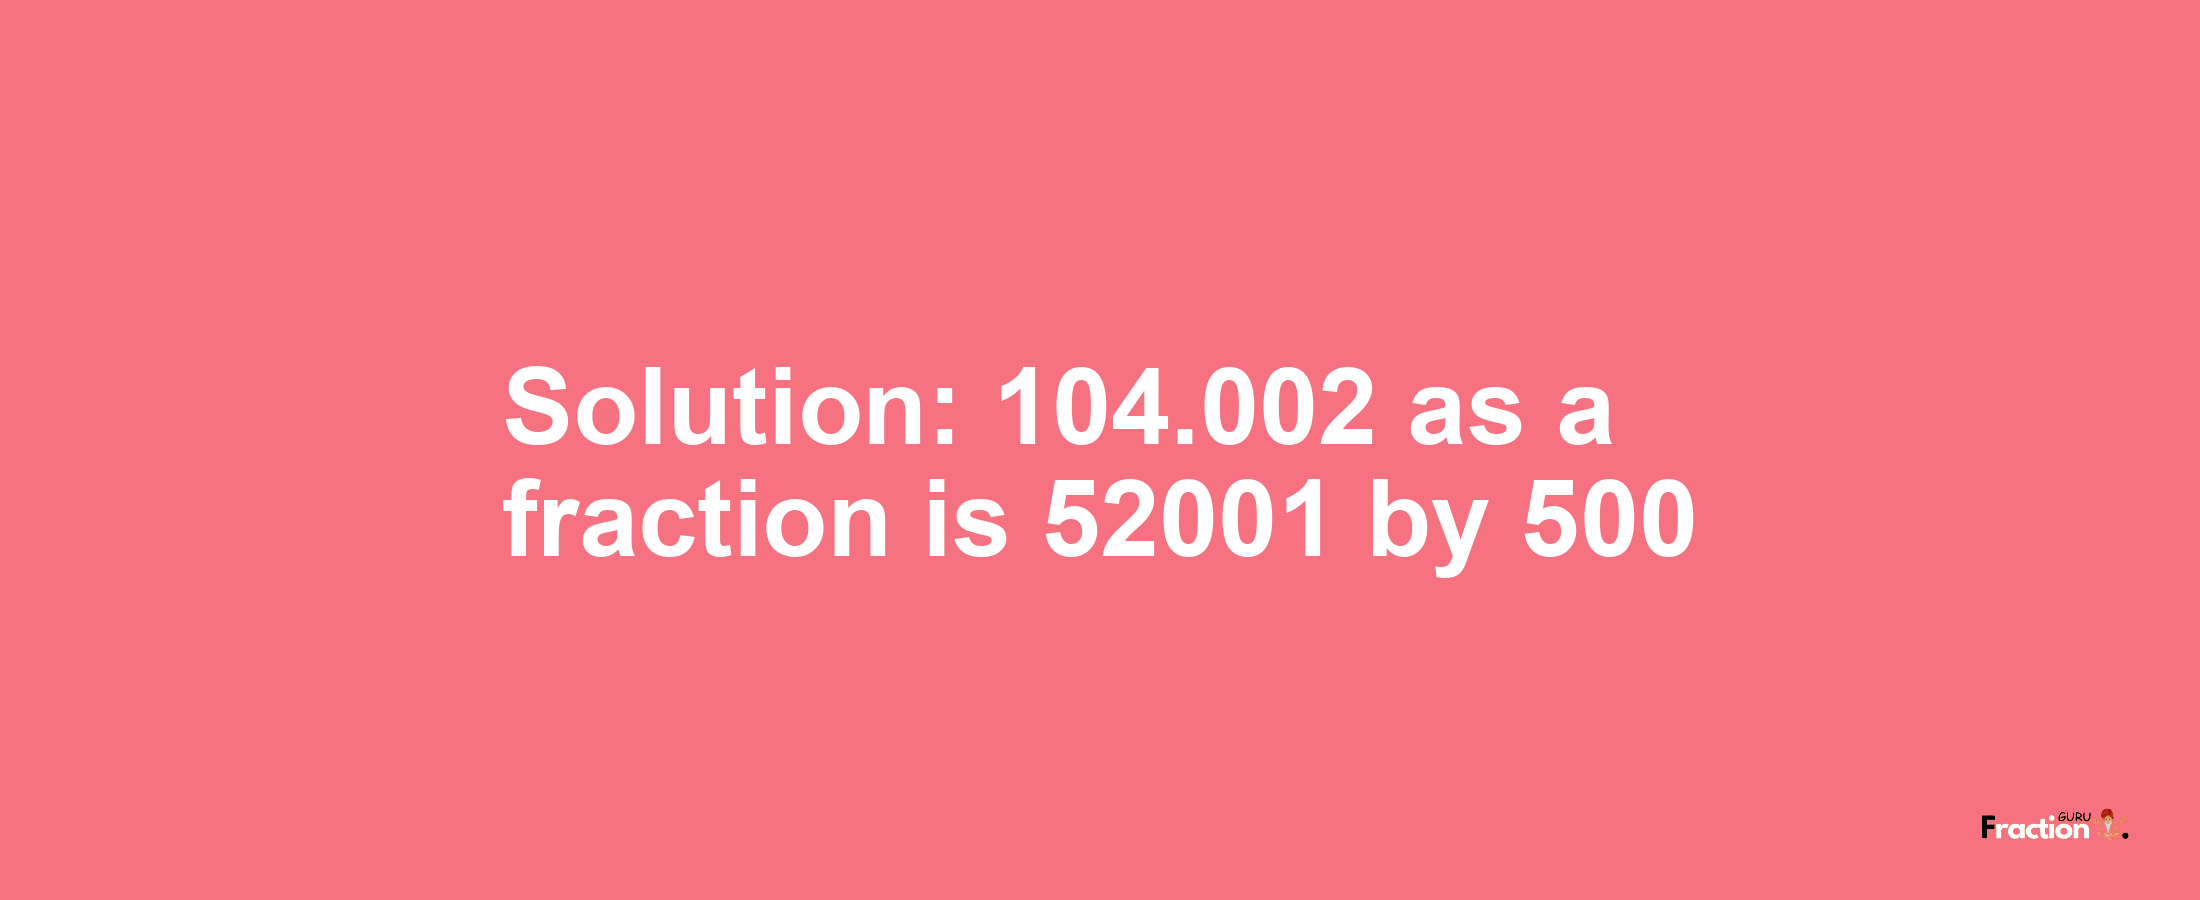 Solution:104.002 as a fraction is 52001/500